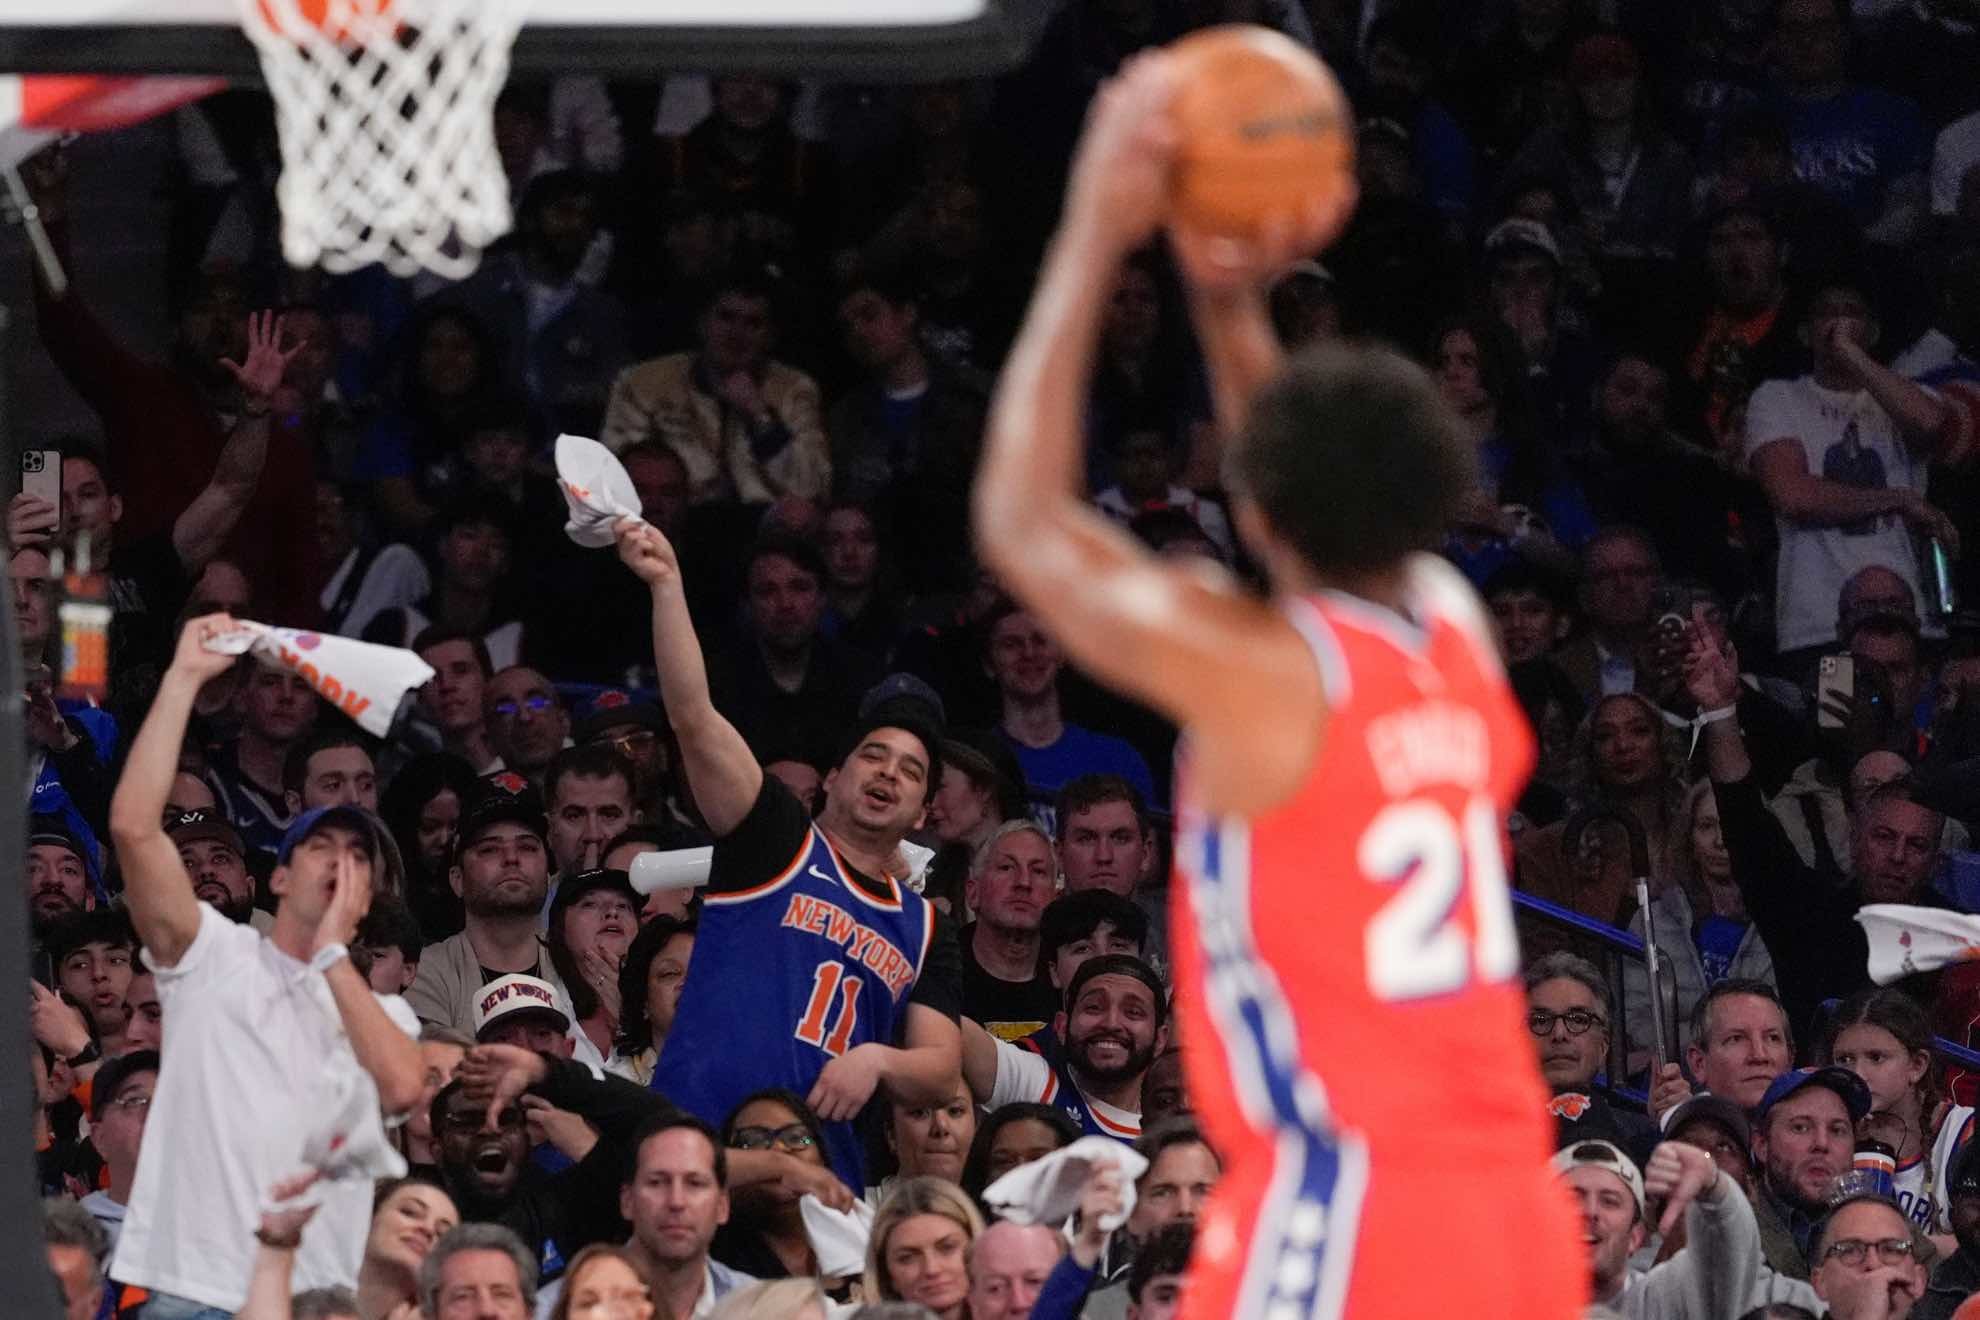 Knicks fans gave Joel Embiid no sympathy for playing through injury